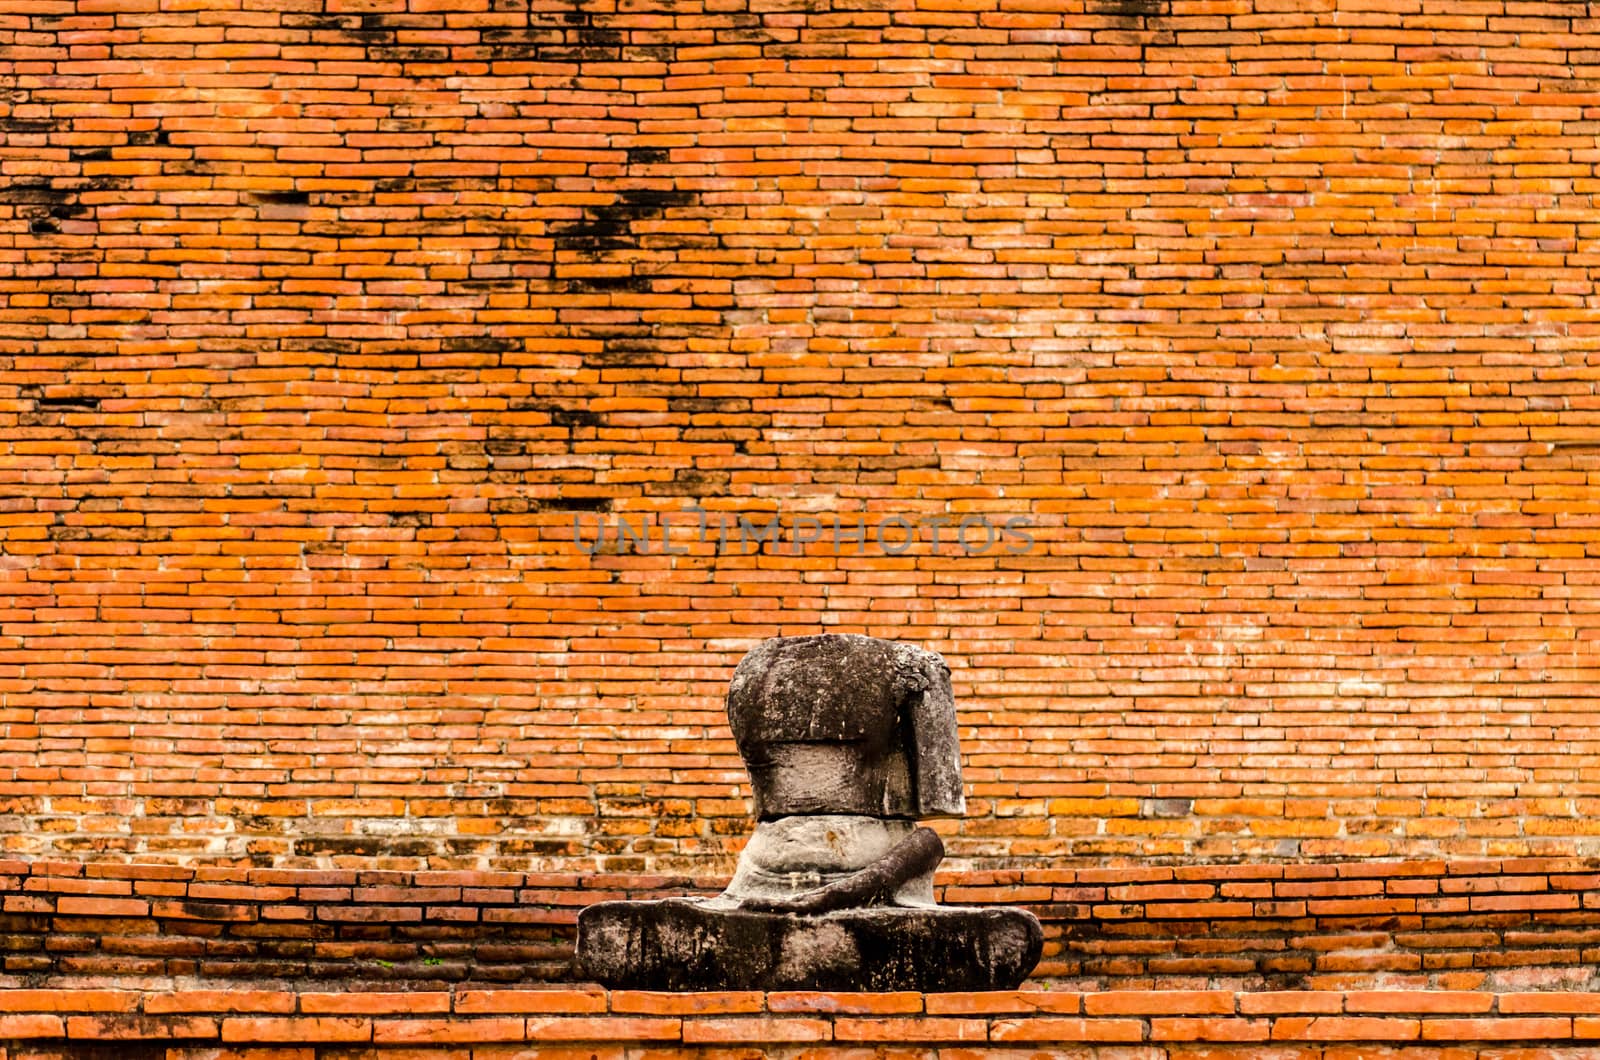 The Fracture buddha statue in Temple wat Mahathat in Ayutthaya historical park, Thailand